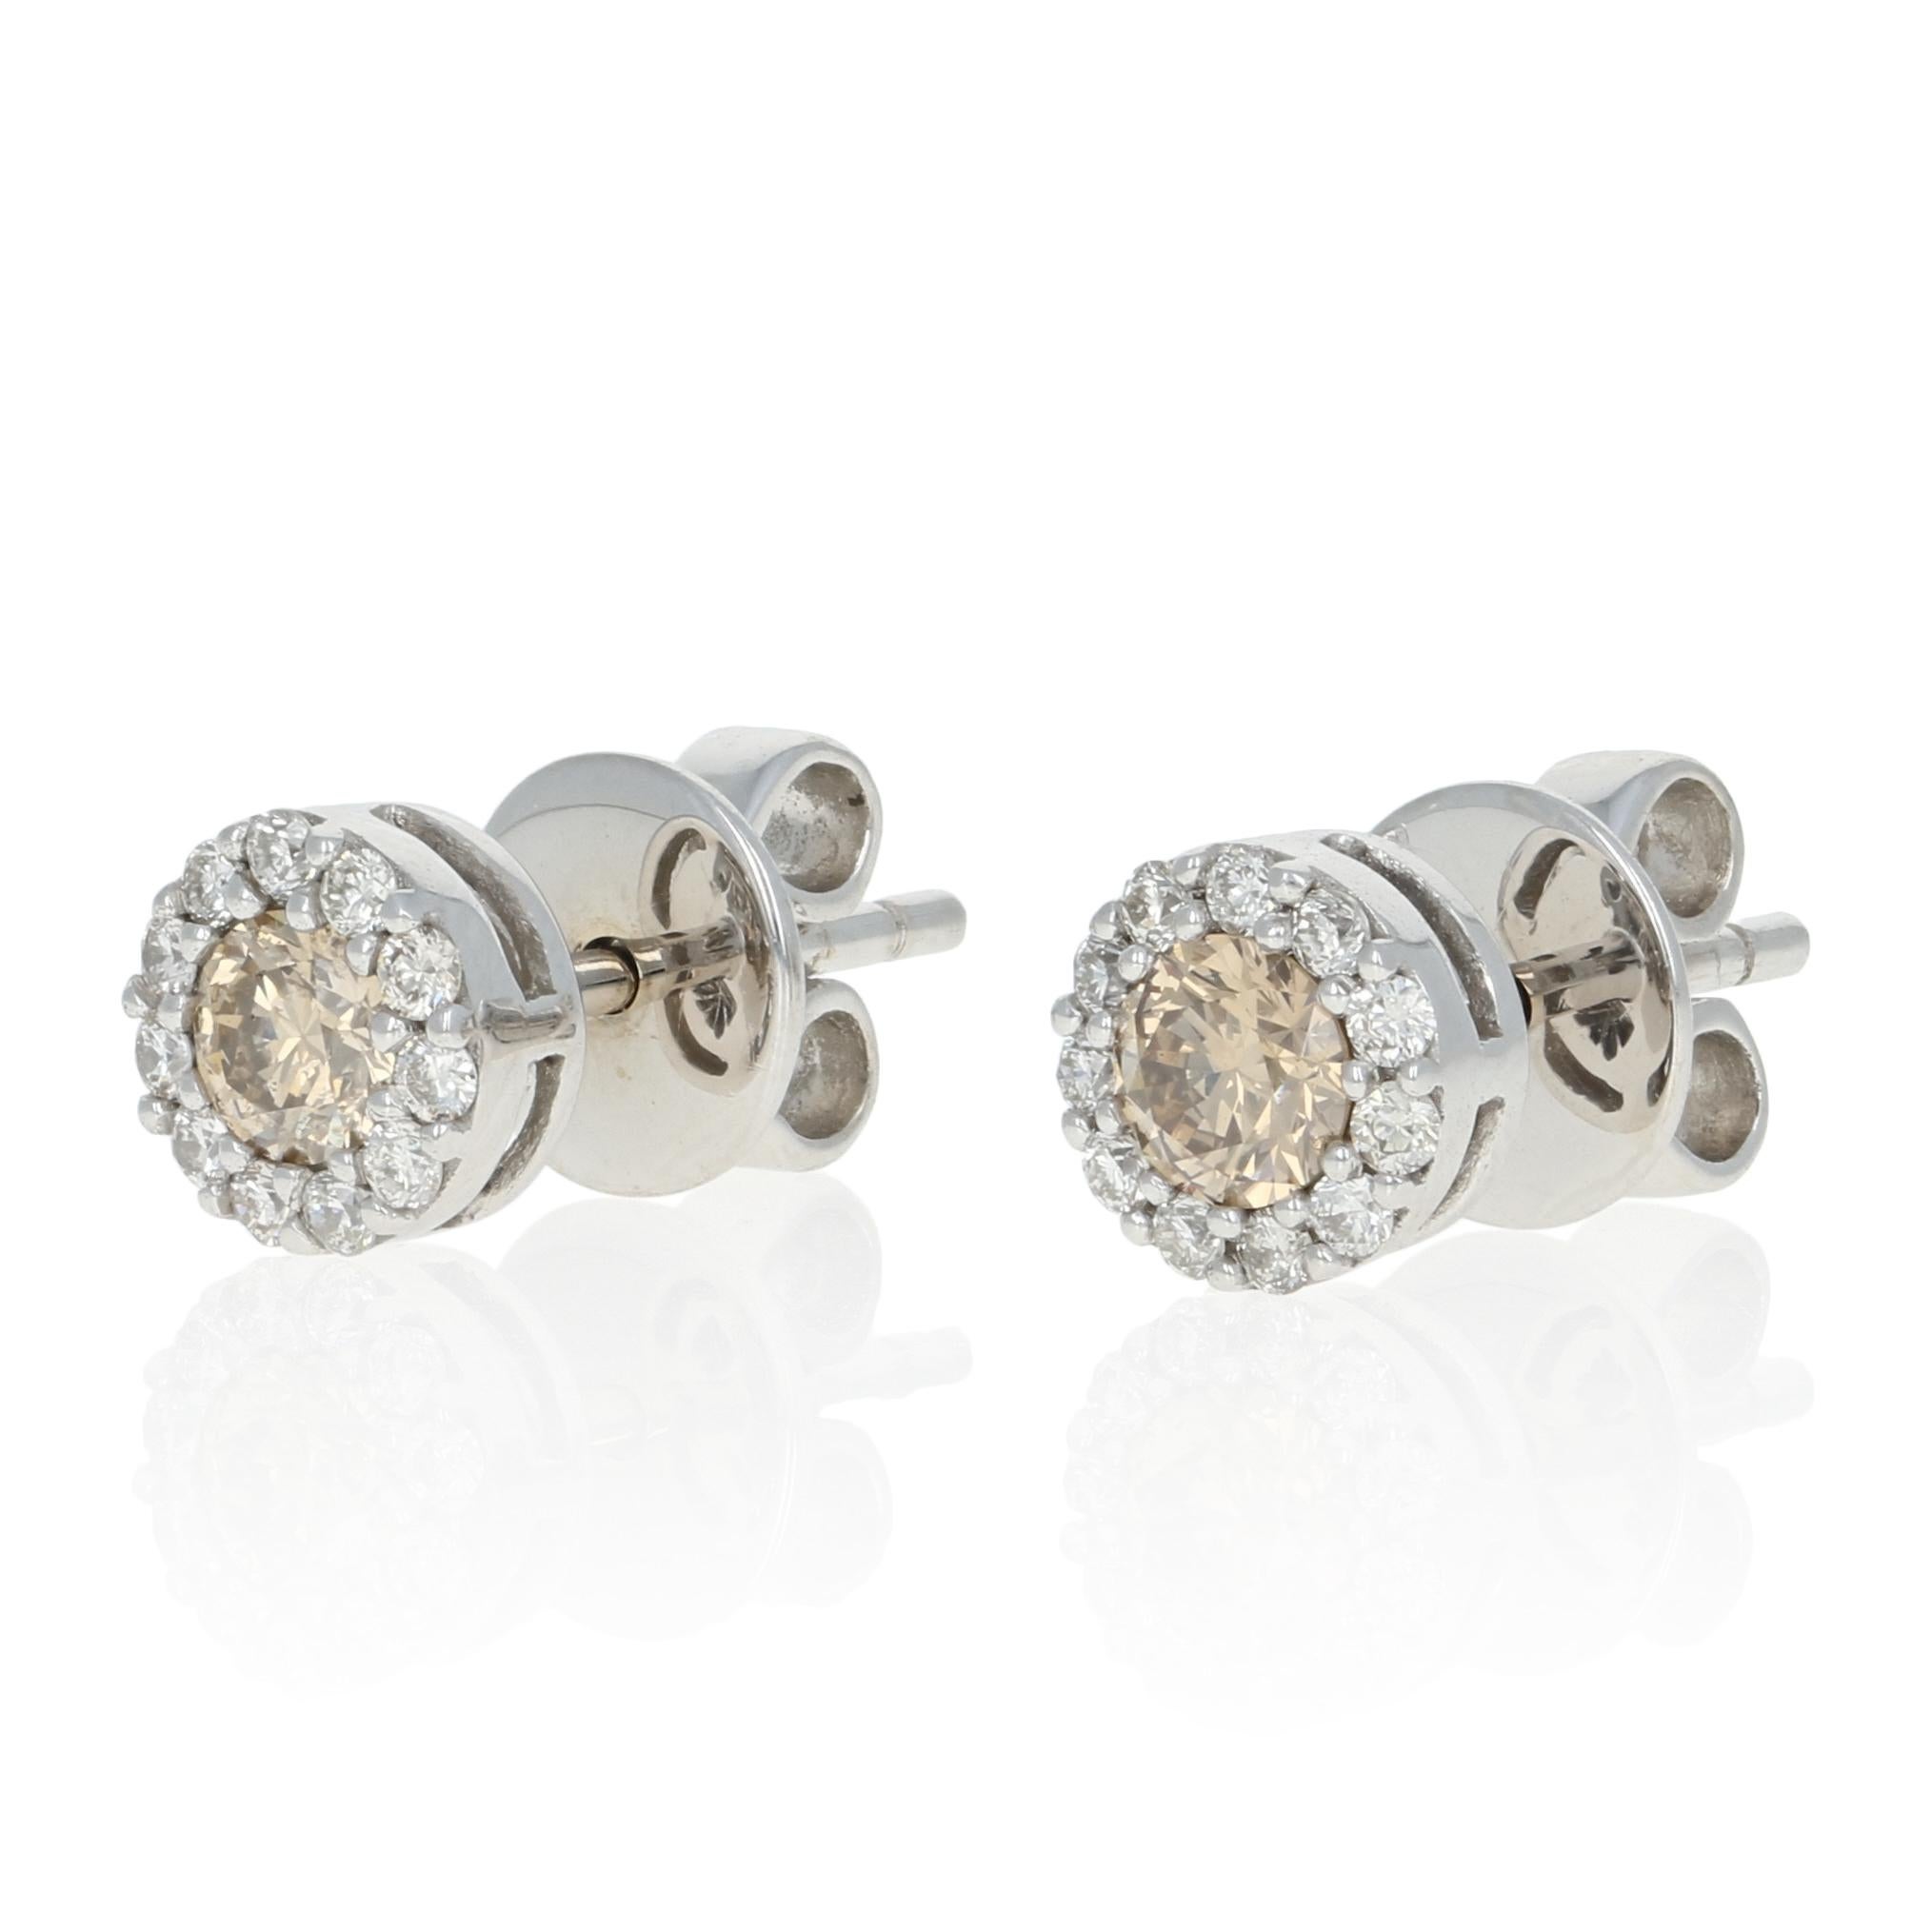 Treat yourself to something sweet that sparkles! Beautifully created by Le Vian, these 14k white gold stud earrings showcase luminous chocolate diamonds framed by glittering vanilla diamond halos. These designer earrings originally retail for $2,600